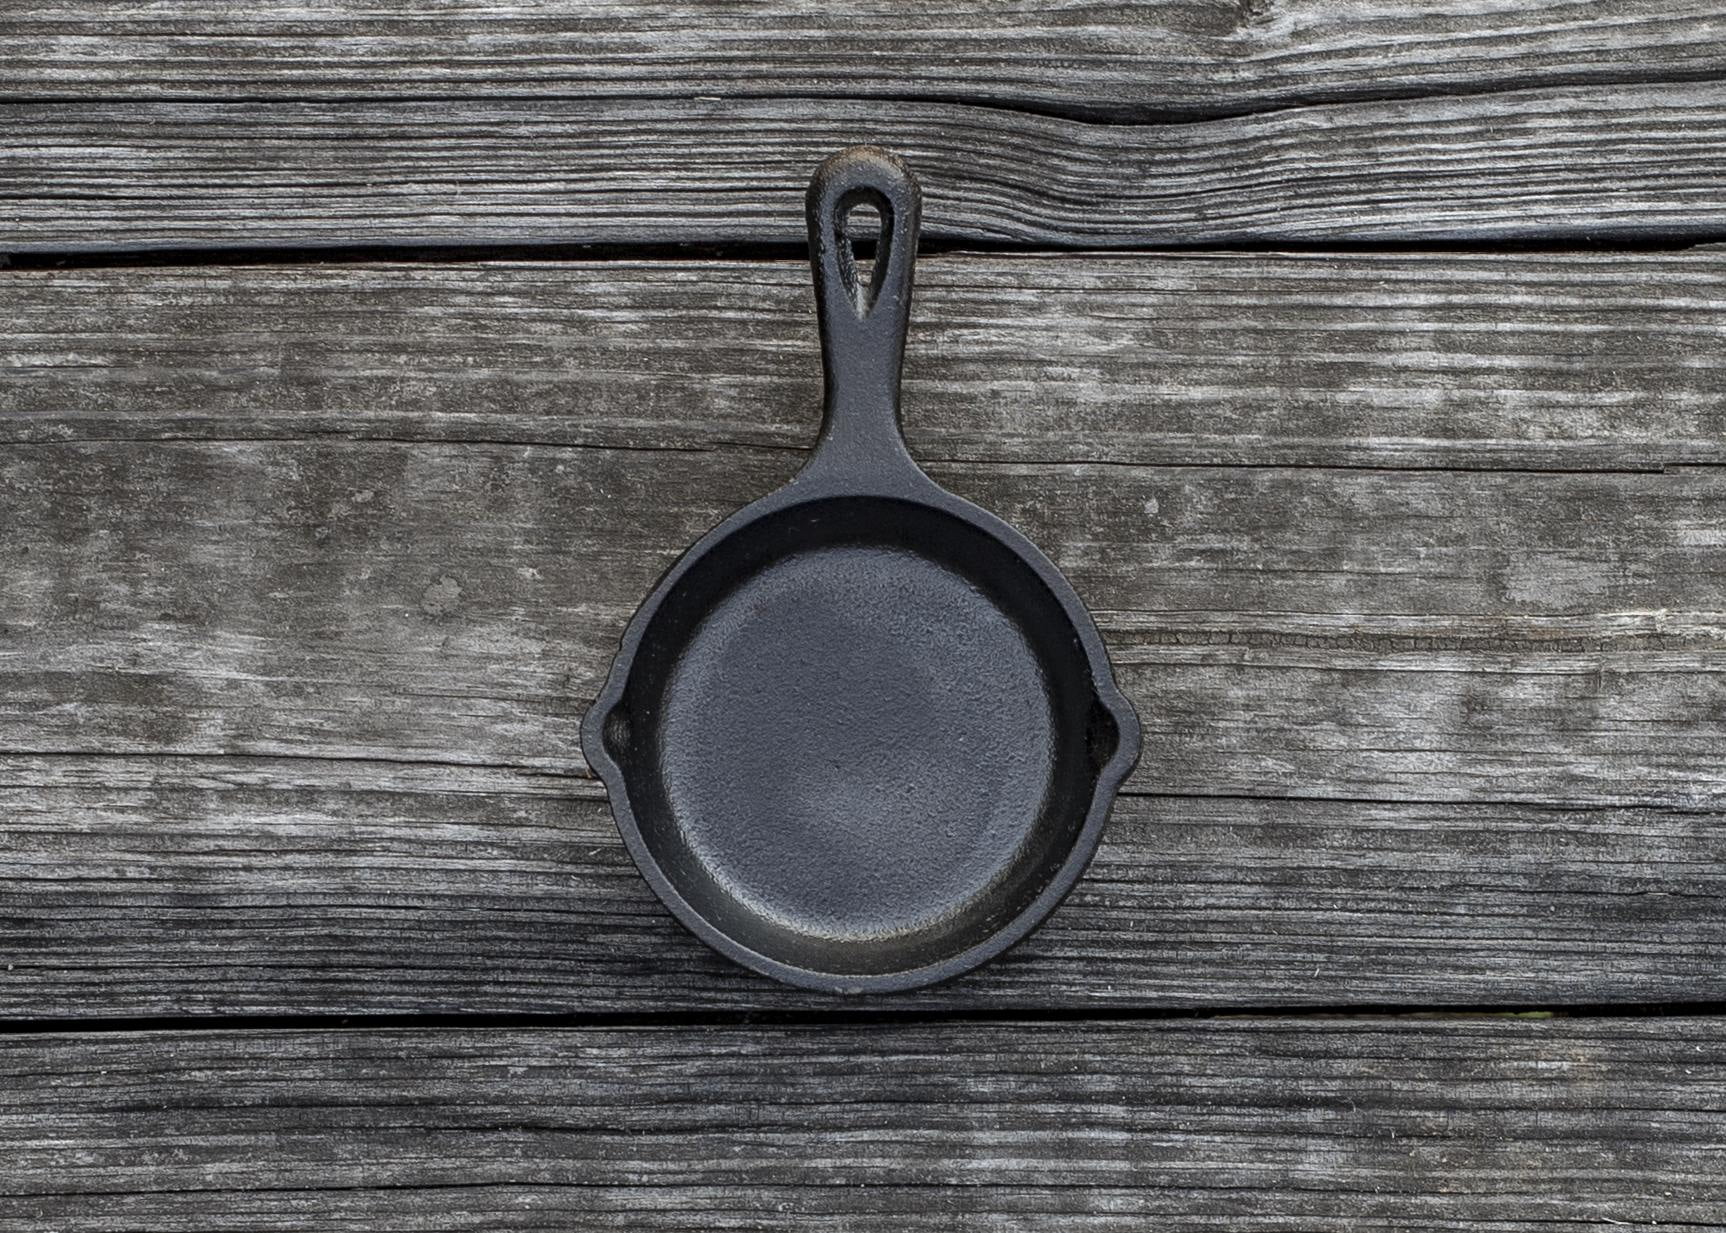 Lodge 10.25 Inch Cast Iron Pre-Seasoned Skillet – Signature Teardrop Handle  - Use in the Oven, on the Stove, on the Grill, or Over a Campfire, Black